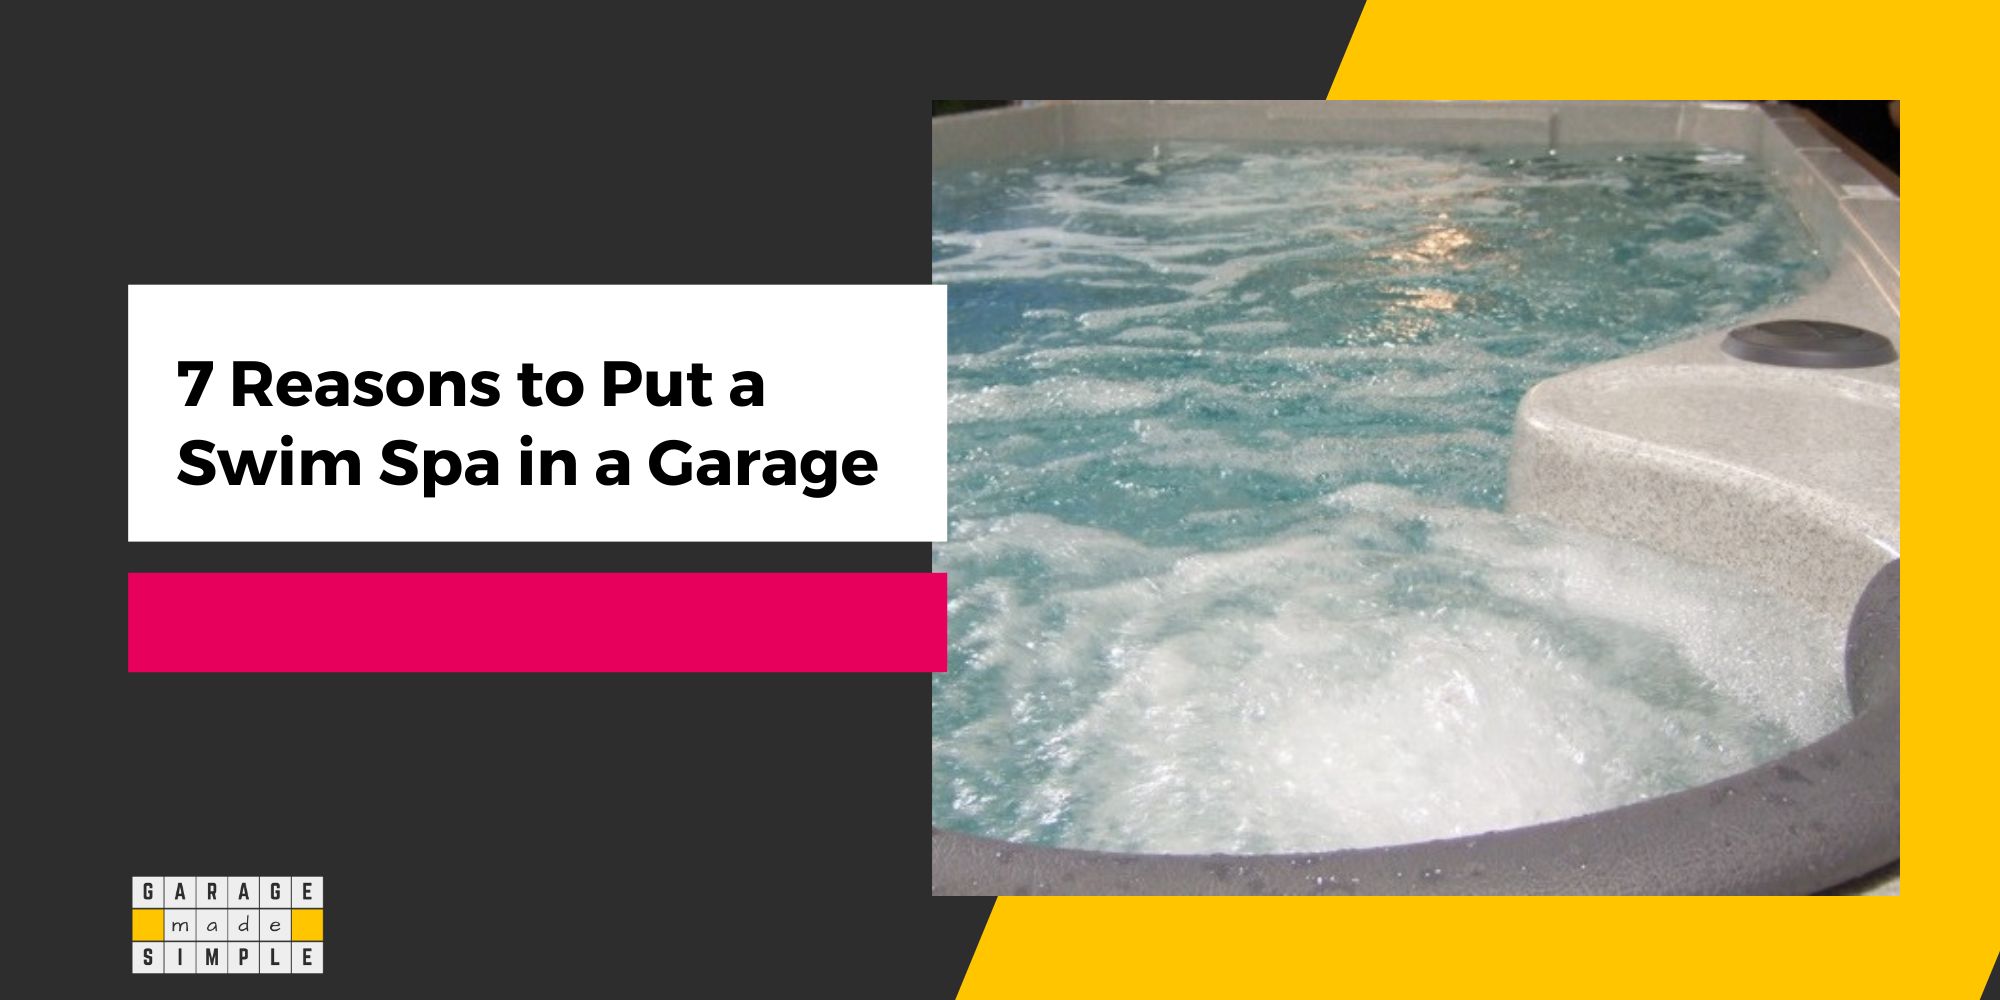 7 Reasons Why Putting a Swim Spa in a Garage Is Great!